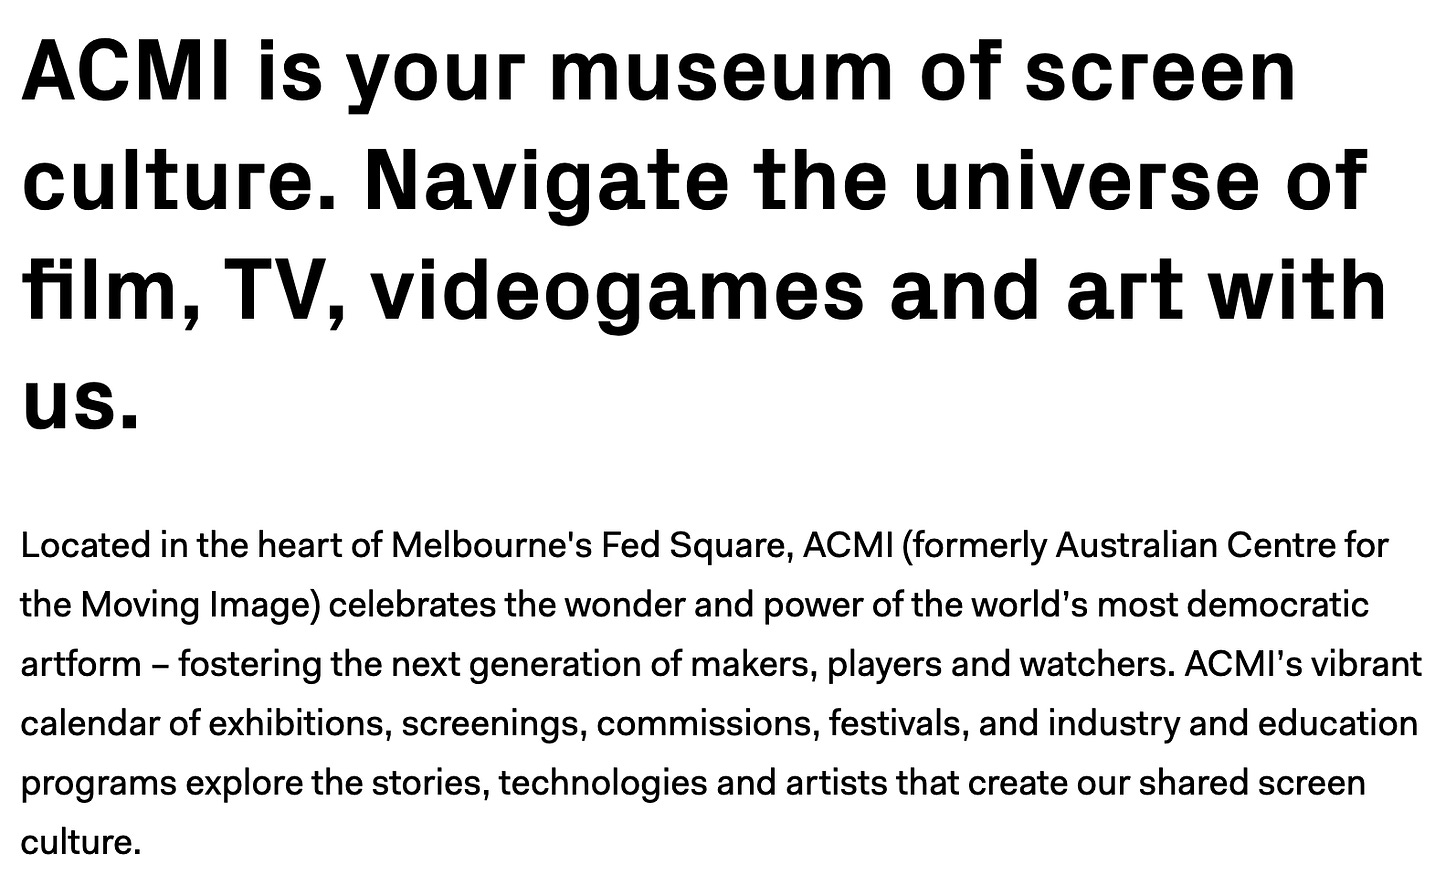 ACMI is your museum of screen culture. Navigate the universe of film, TV, videogames and art with us. Located in the heart of Melbourne's Fed Square, ACMI (formerly Australian Centre for the Moving Image) celebrates the wonder and power of the world’s most democratic artform – fostering the next generation of makers, players and watchers. ACMI’s vibrant calendar of exhibitions, screenings, commissions, festivals, and industry and education programs explore the stories, technologies and artists that create our shared screen culture.